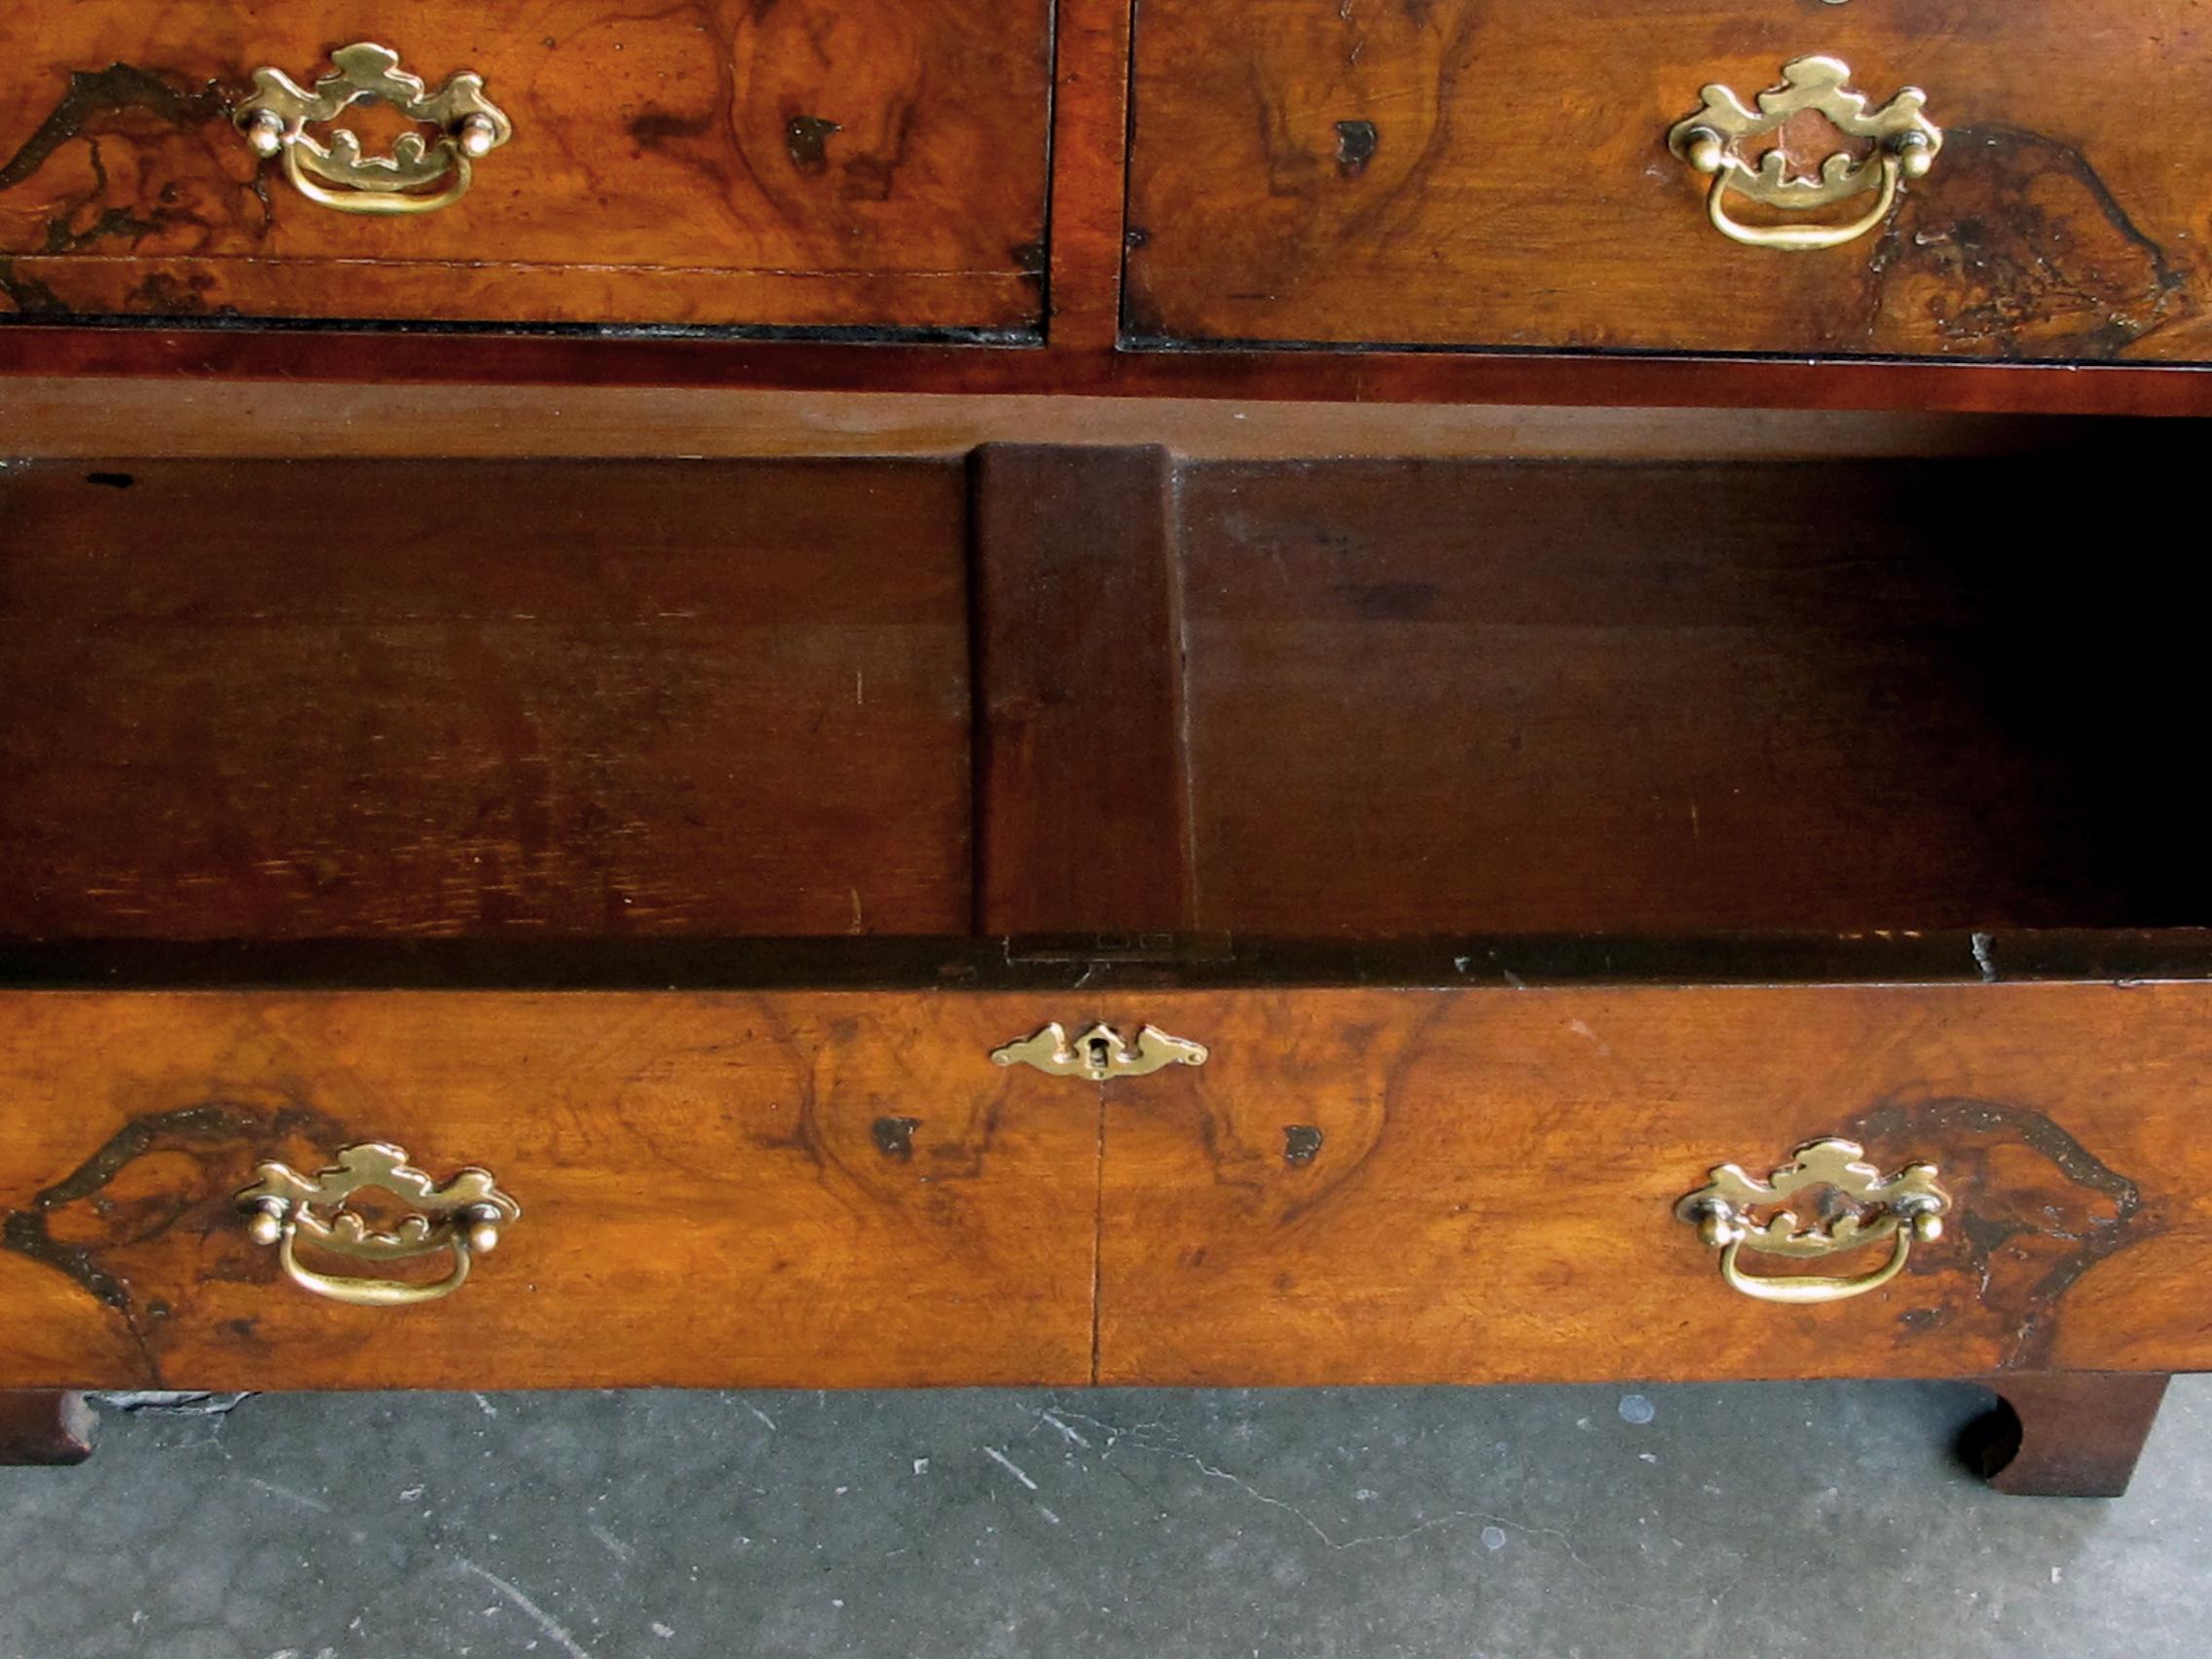 Late 19th Century Richly-Colored English George III Style Burl-Walnut Bachelors Chest